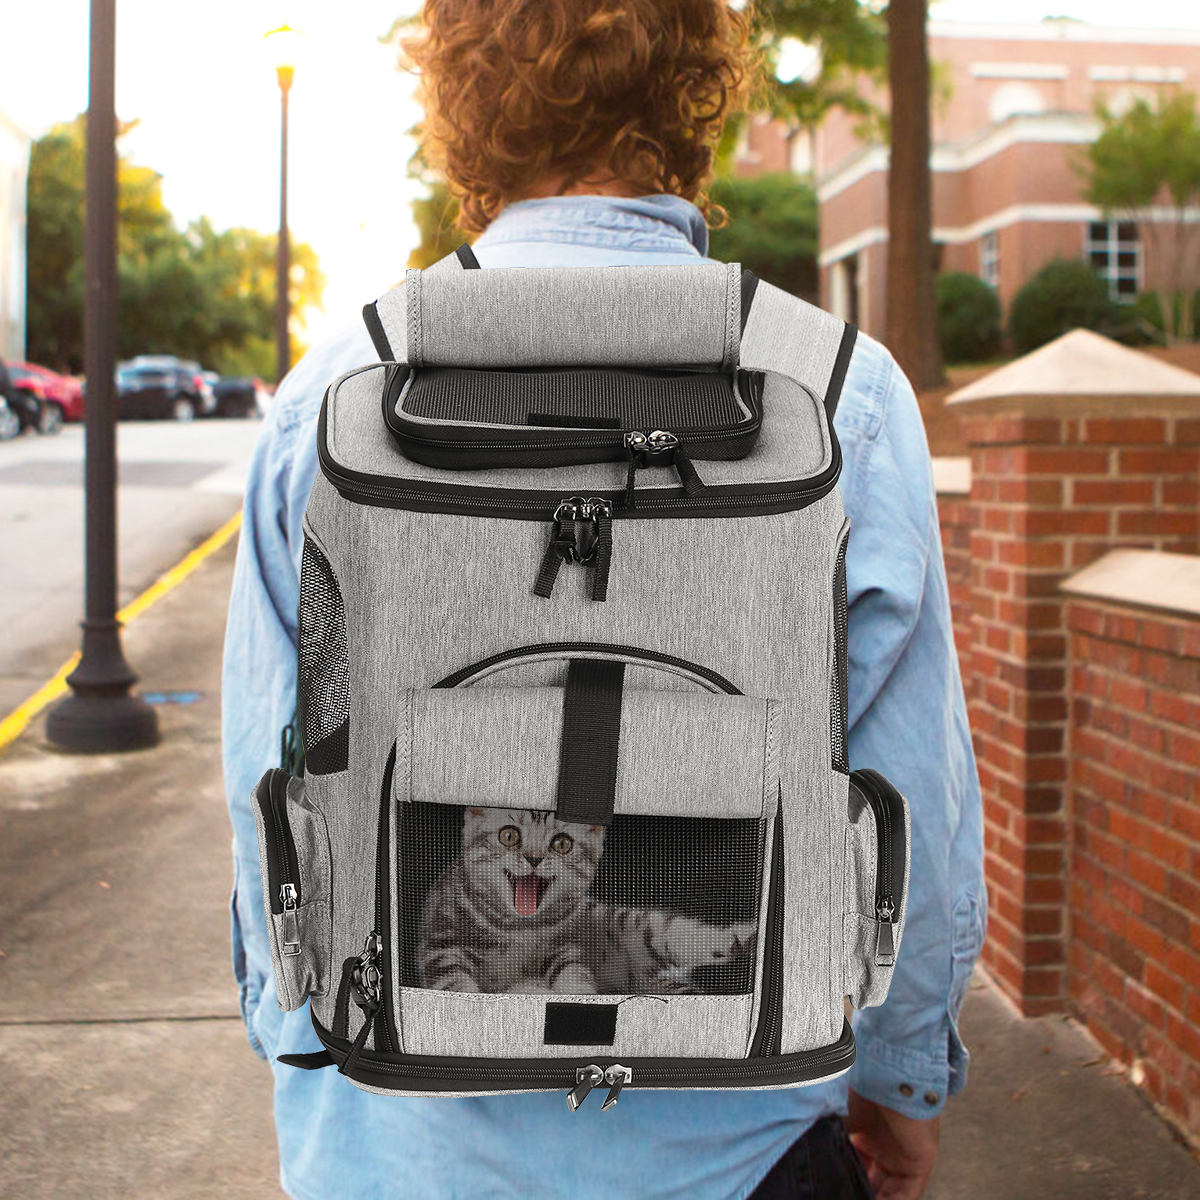 Pet-Carrier-Backpack-Breathable-Puppy-Travel-Space-Shoulder-Bag-Dog-Cat-Outdoor-Double-sided-cushion-1925739-12